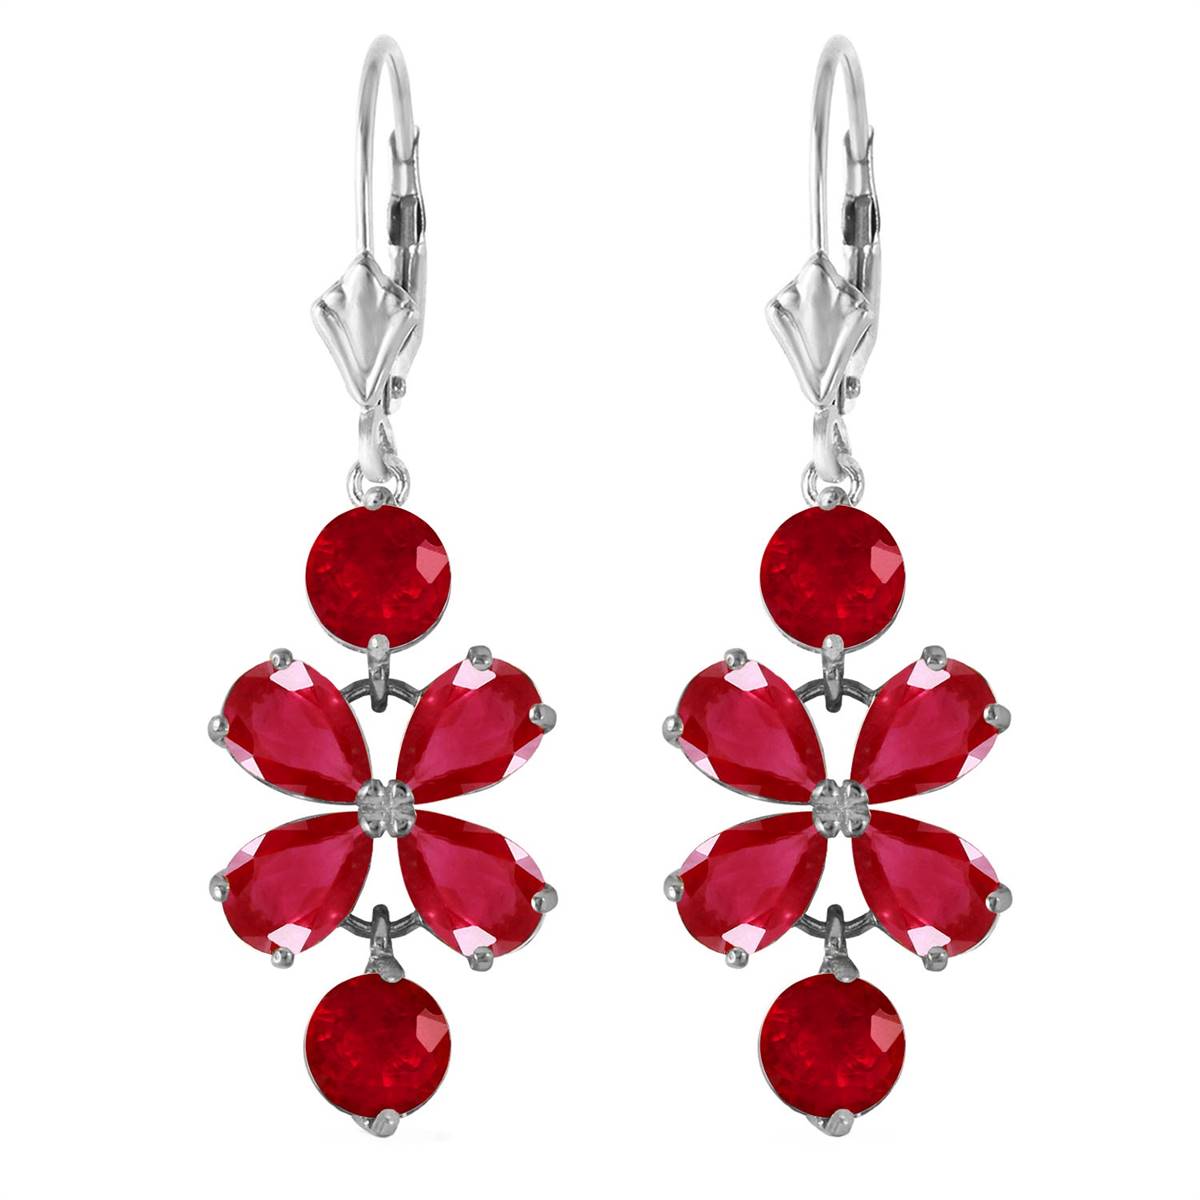 5.32 Carat 14K Solid White Gold Chandelier Earrings Natural Ruby